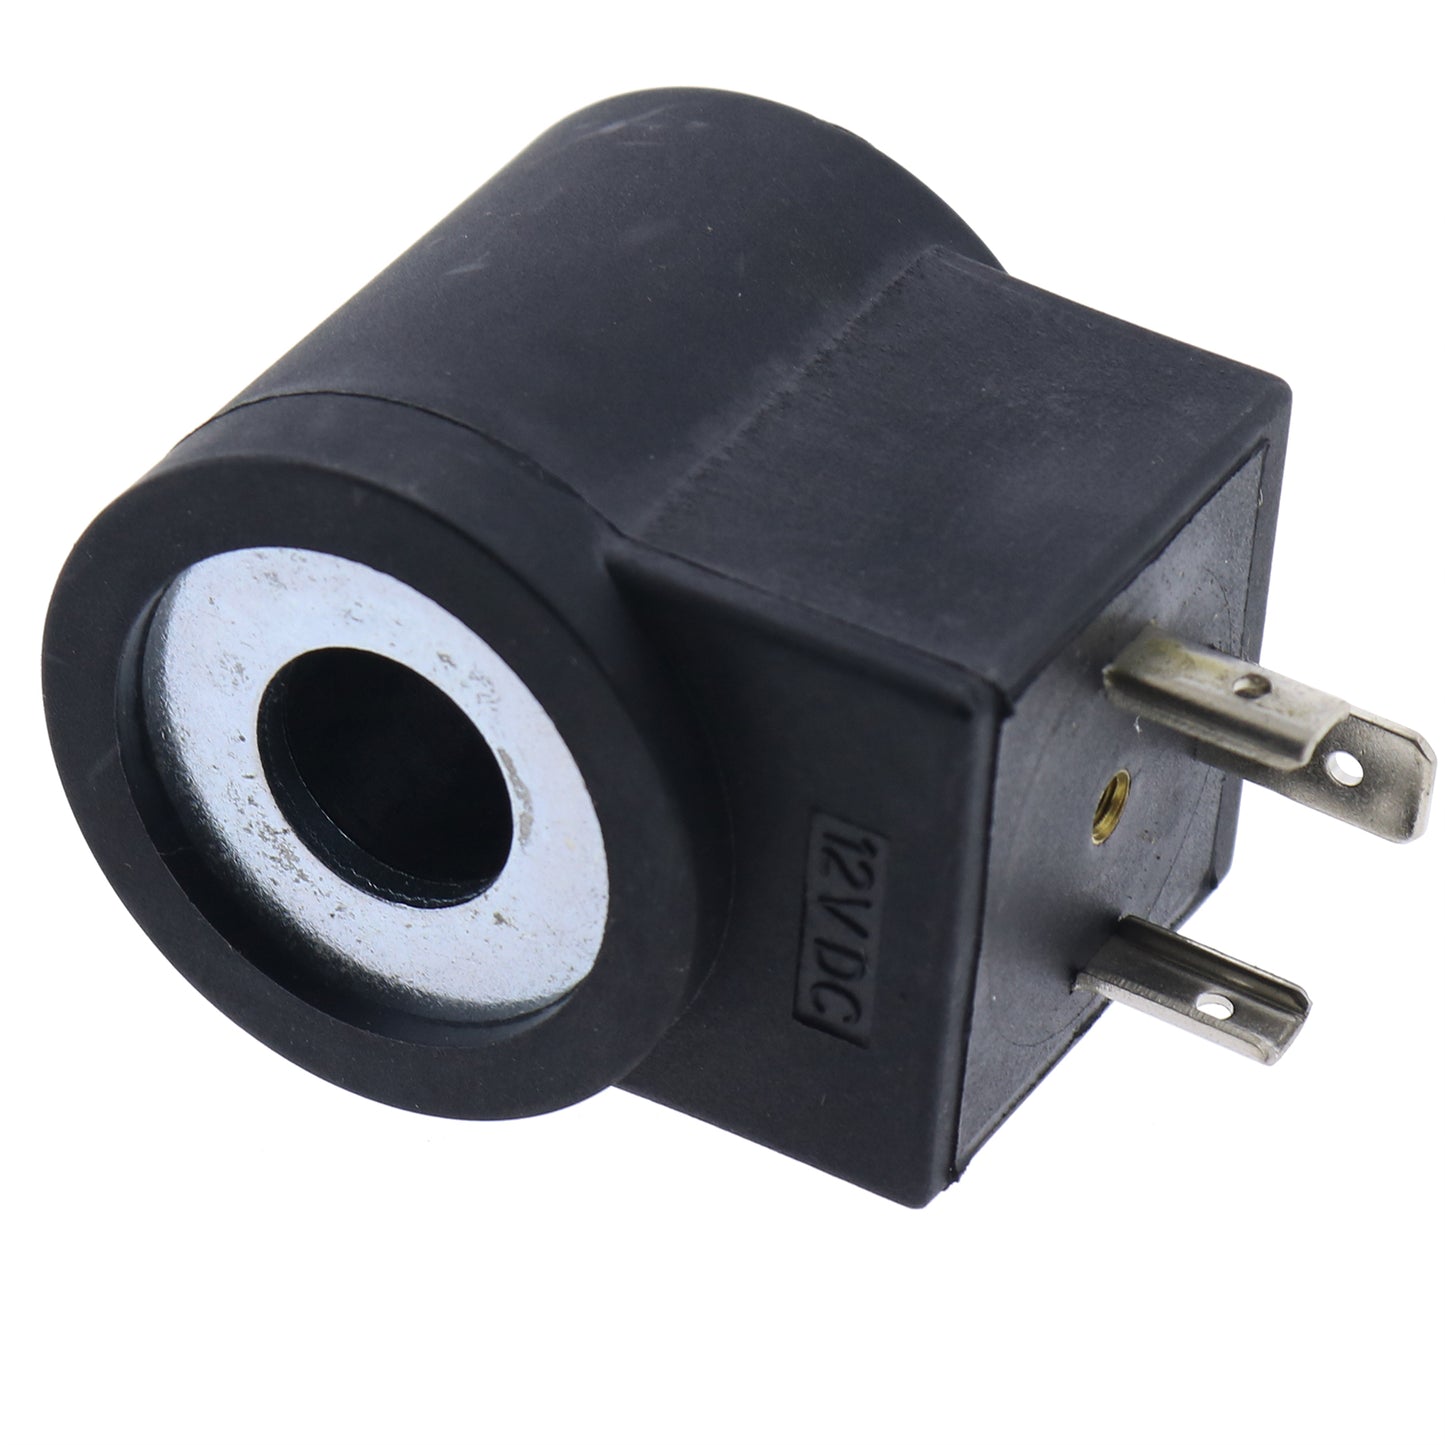 New Cylindrical Solenoid Valve Coil 6306012 with 3 Prongs DIN Connector 24V DC Compatible with HydraForce Valve Stem Series 08 80 88 98